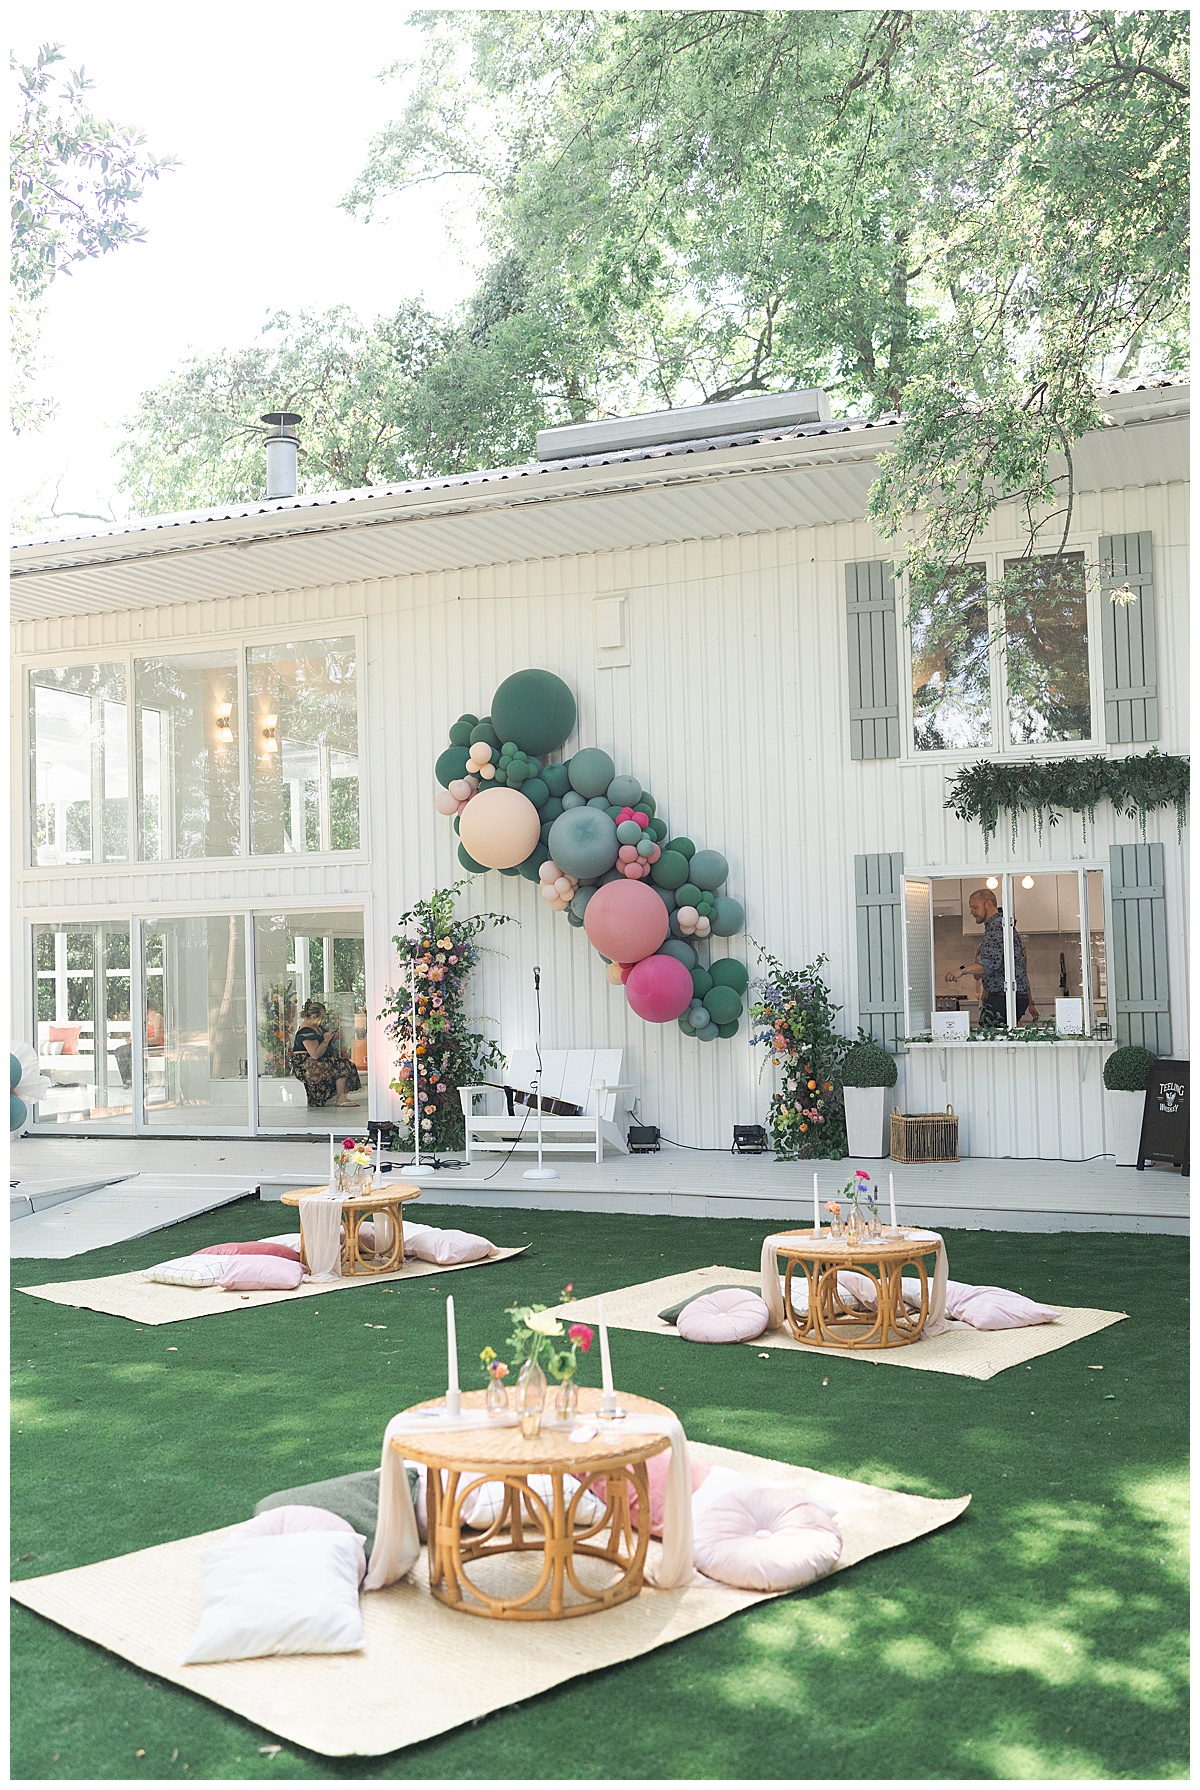 Stunning balloon installation and outdoor picnic for the Open House at The Juliana